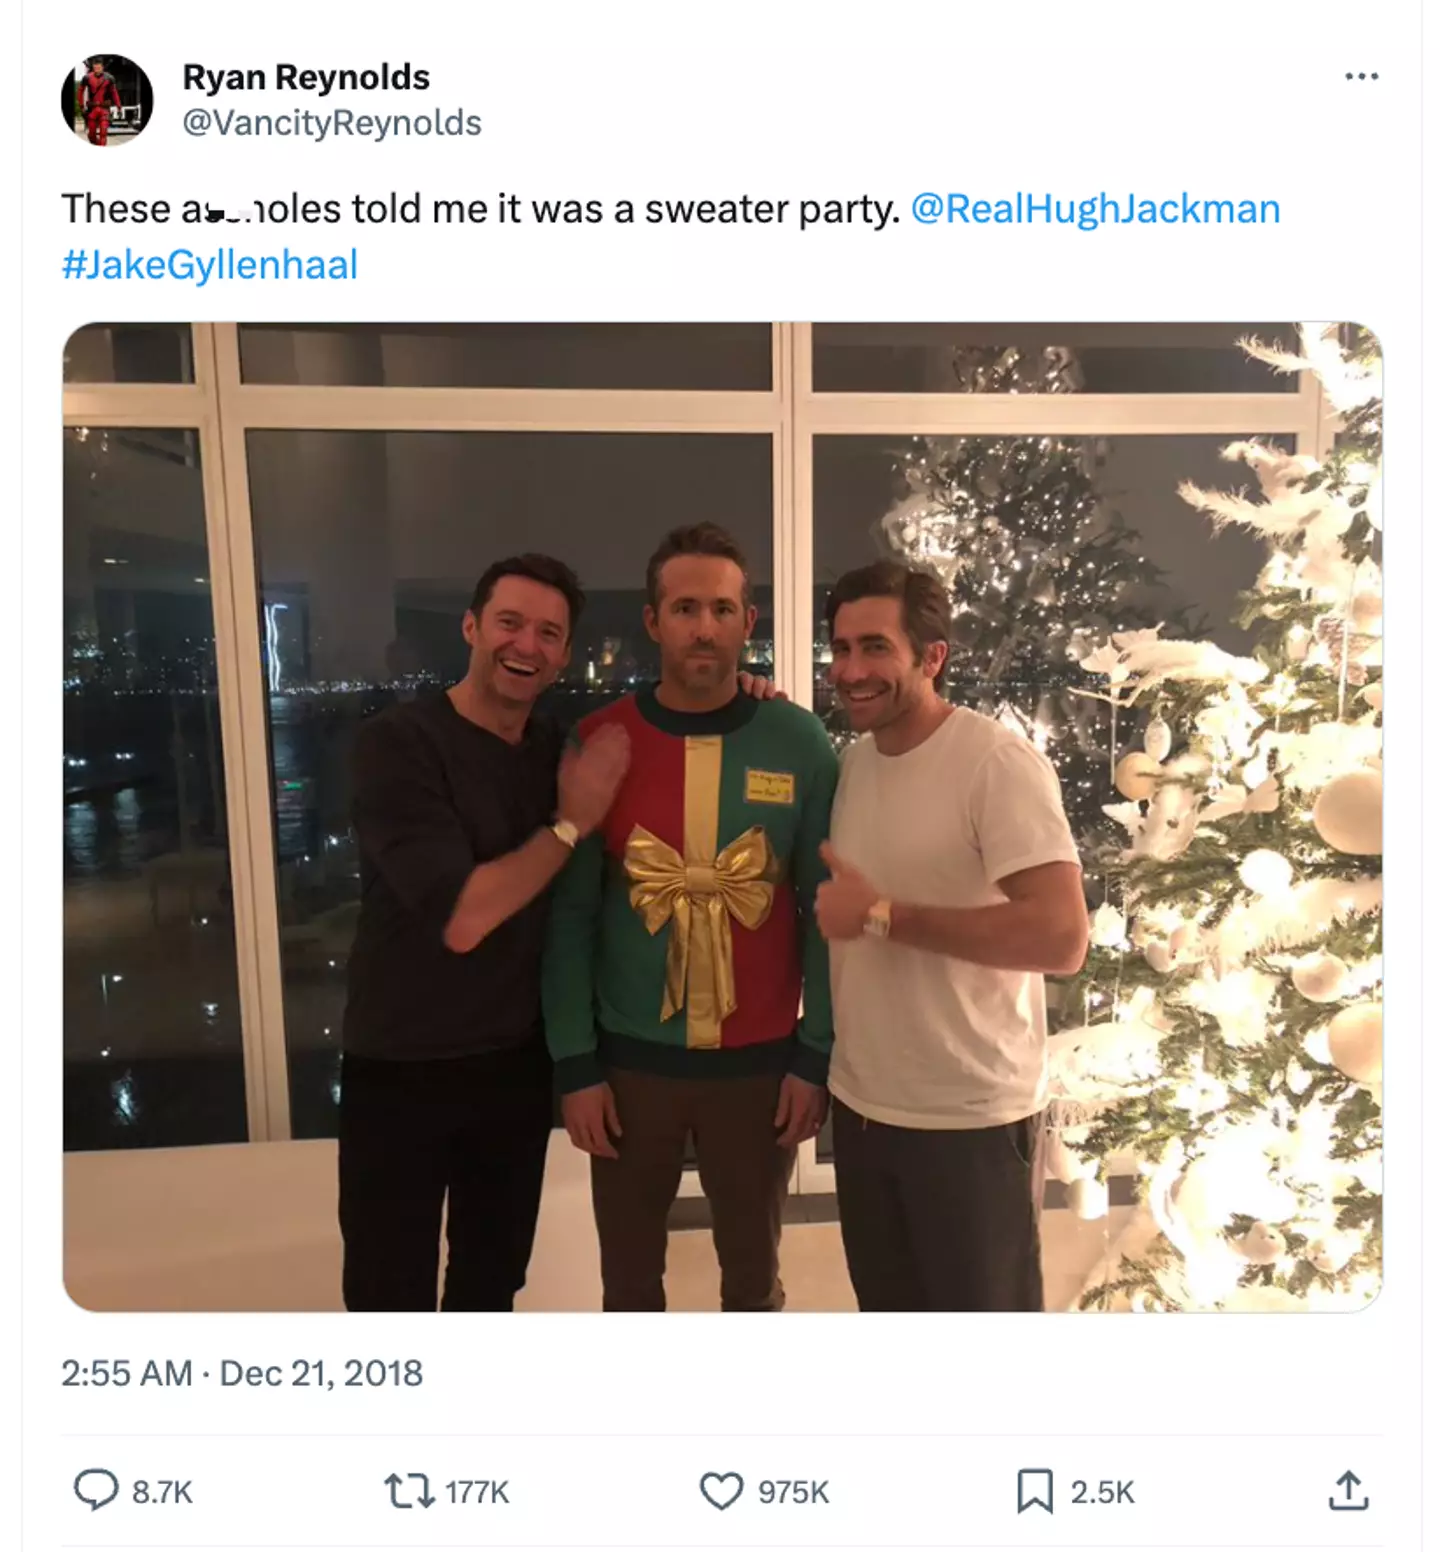 Hugh Jackman previously joined forces with Jake Gyllenhaal to prank Ryan Reynolds.